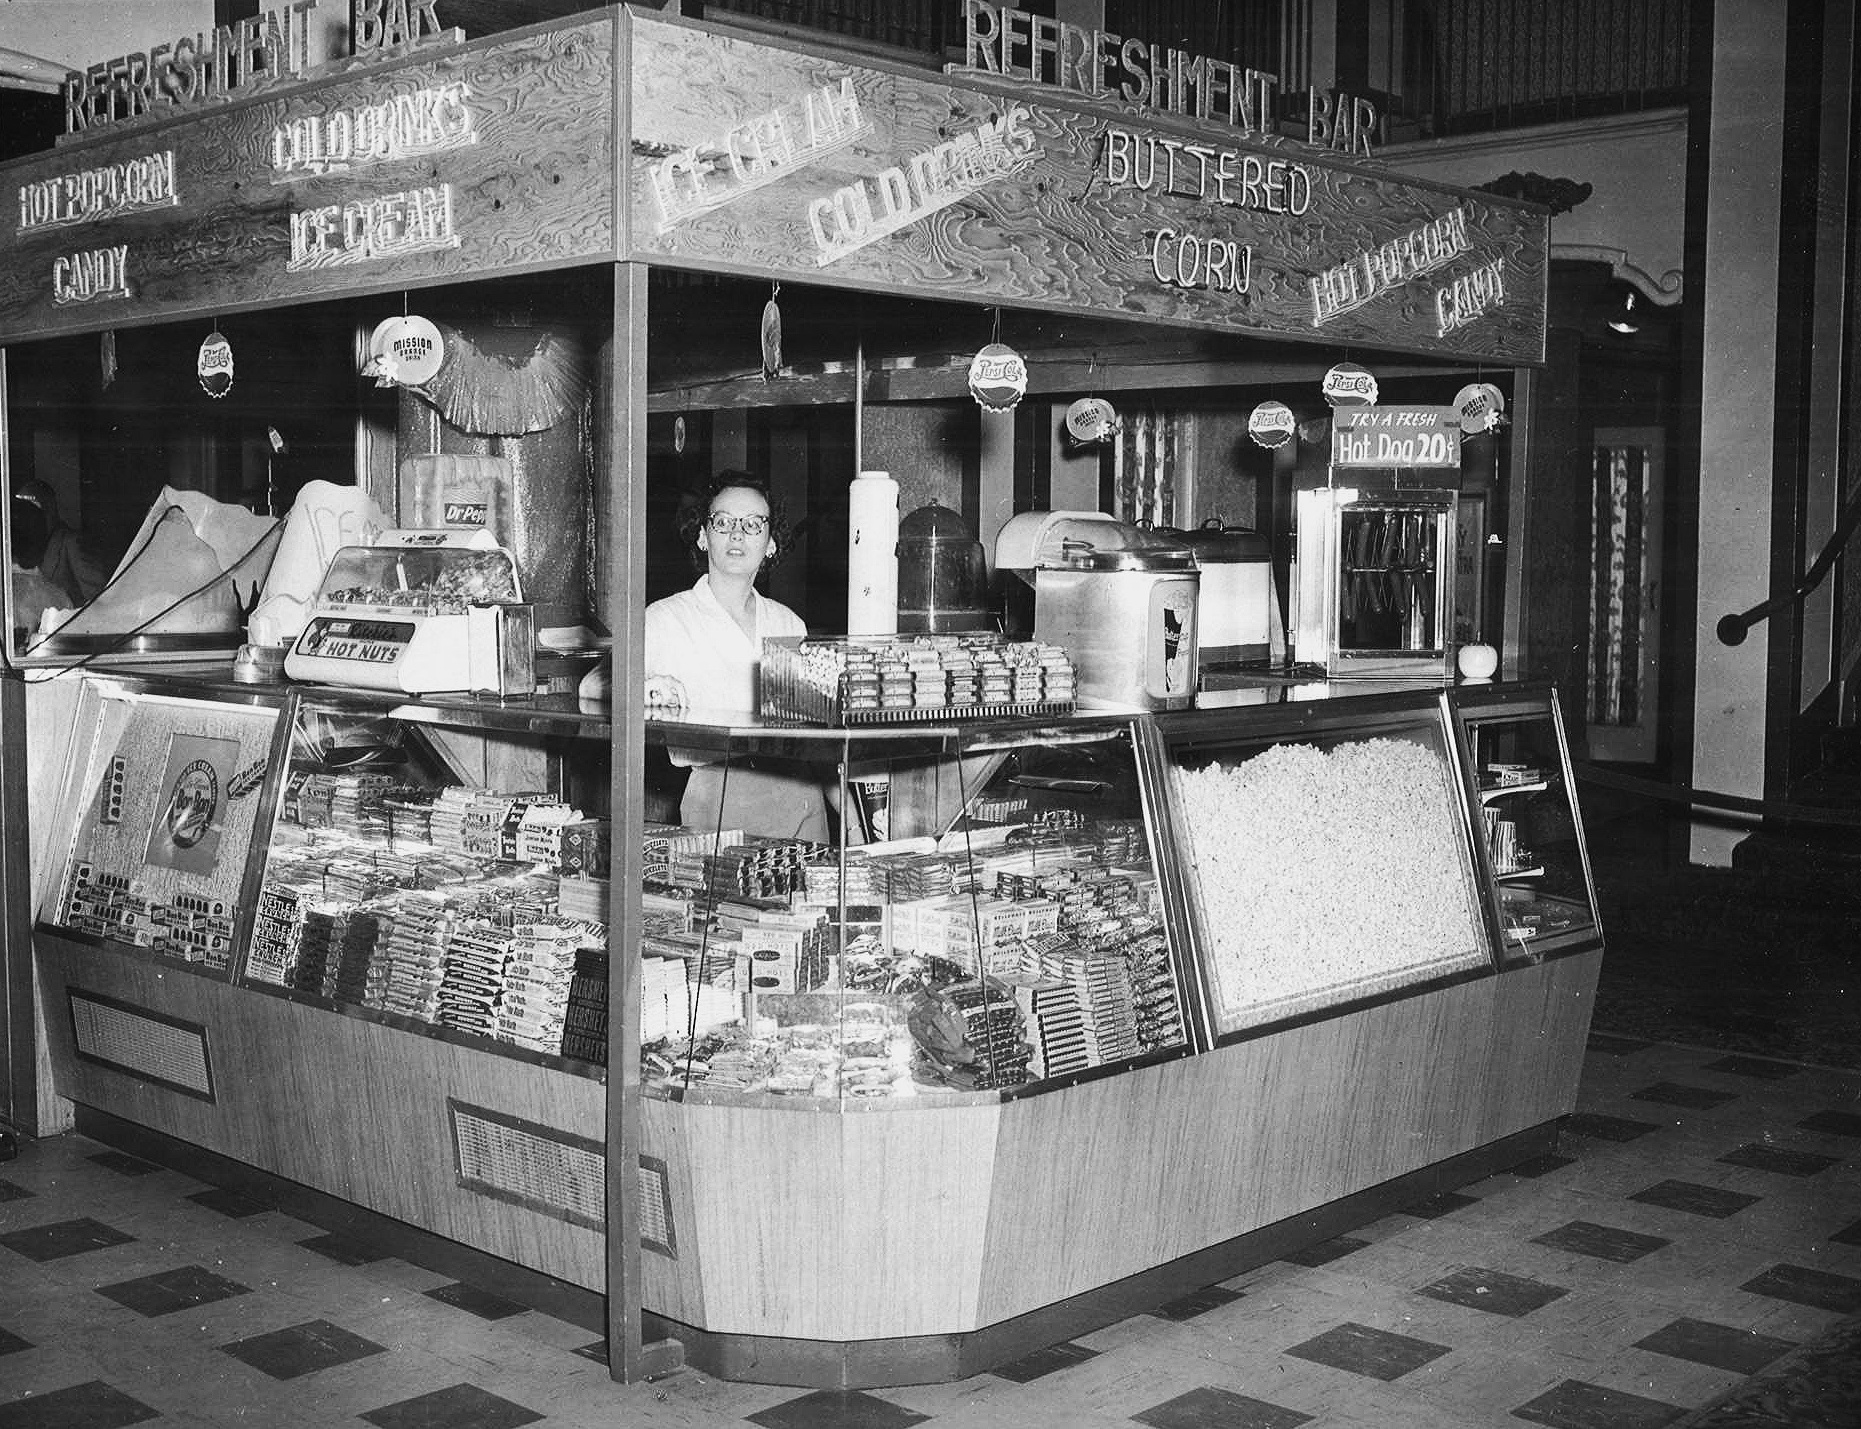 LOBBBY CONCESSION STAND (1950s)